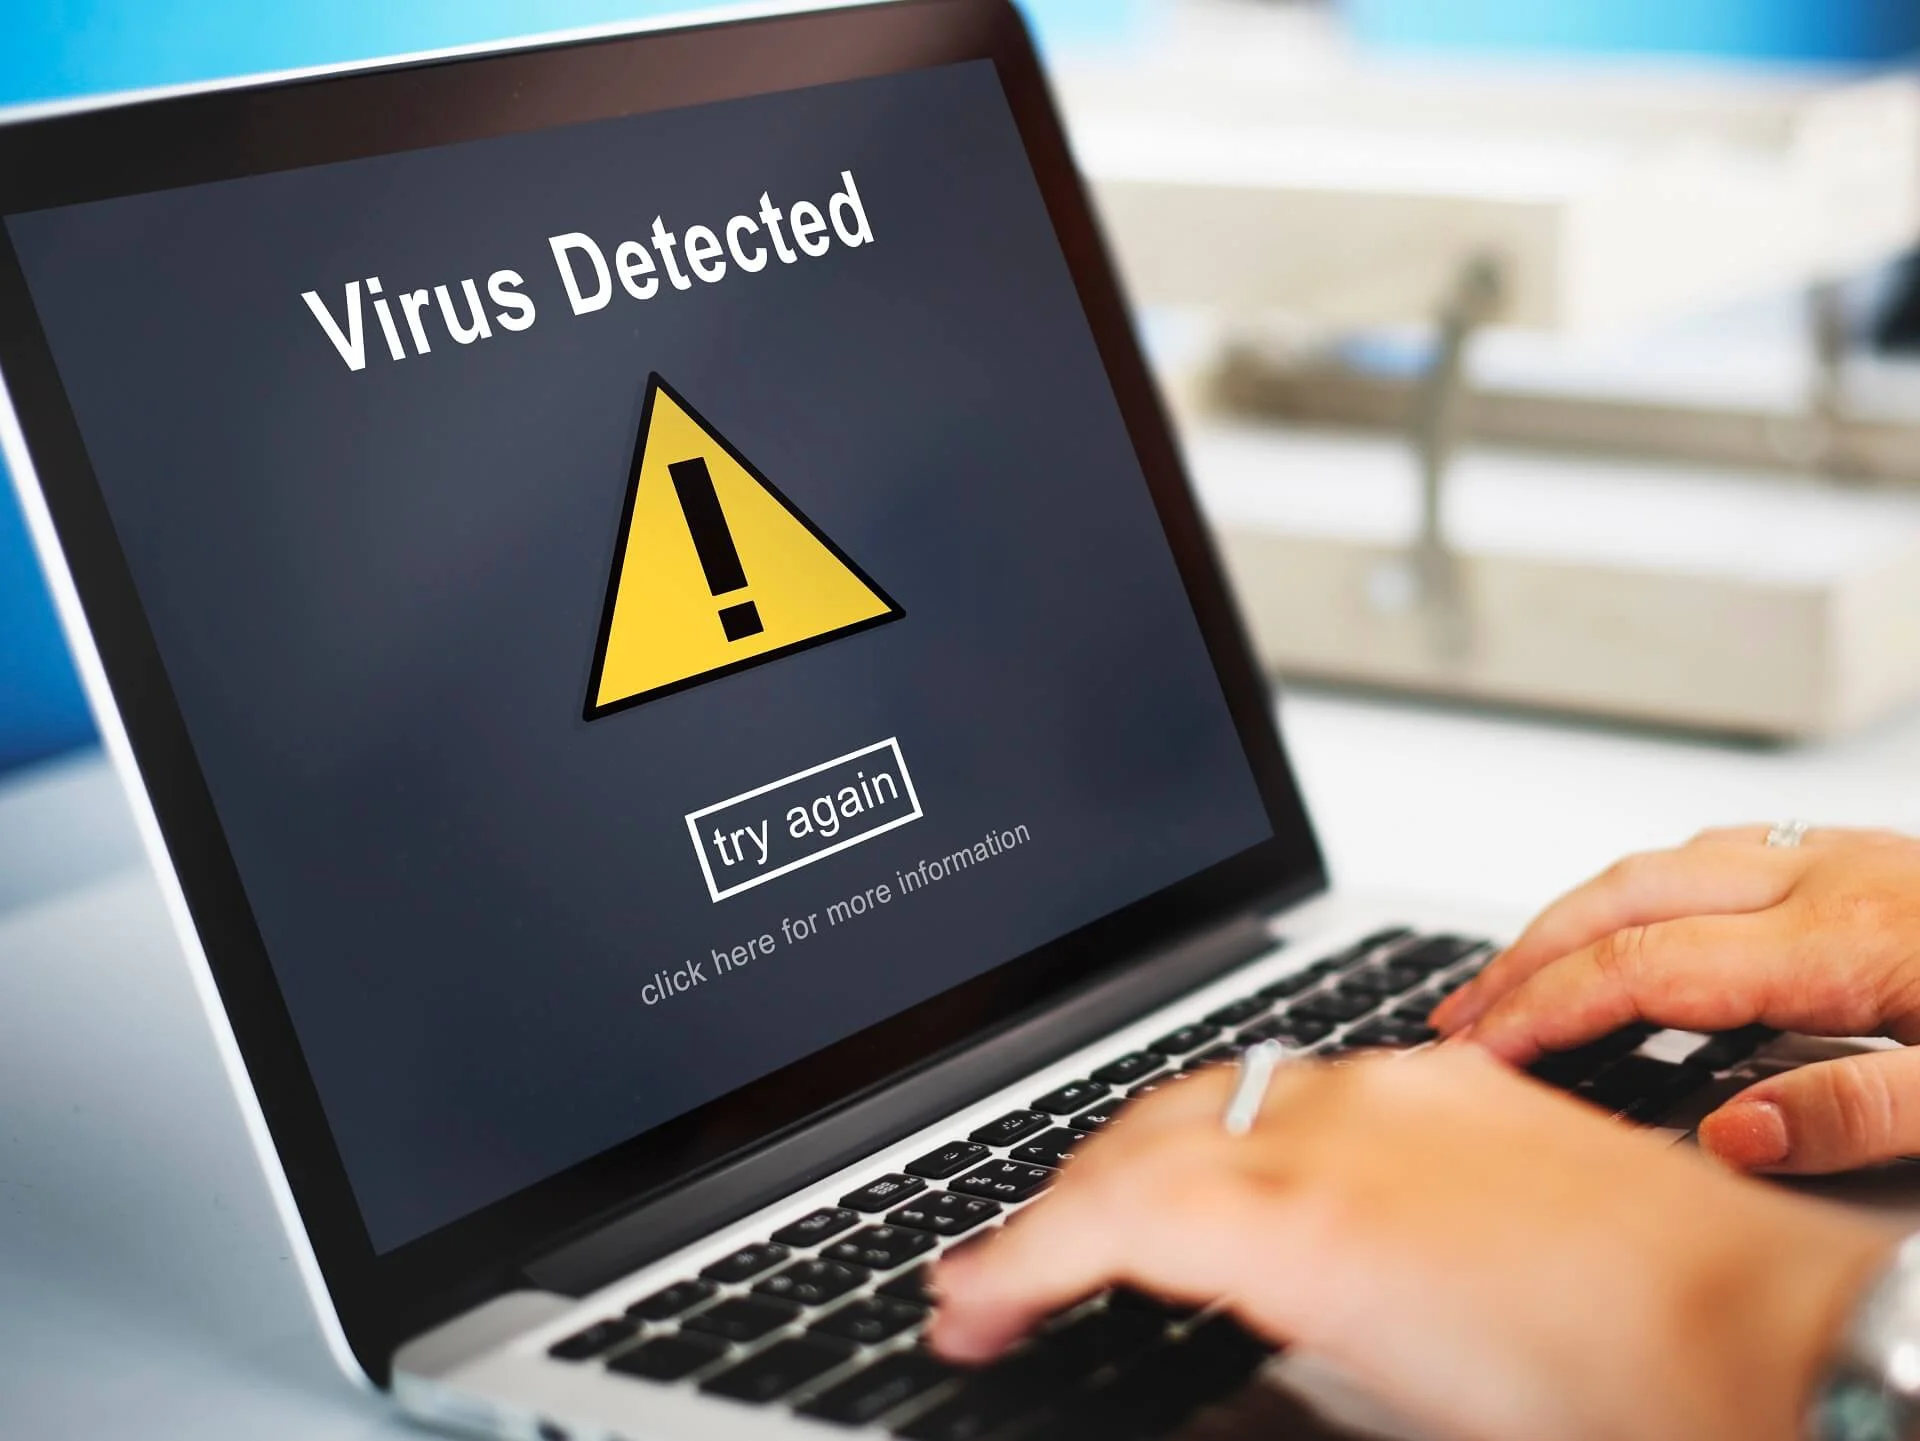 Malware Are Merciless Attackers That Infiltrate and Take the Spoils Without Leaving a Footprint